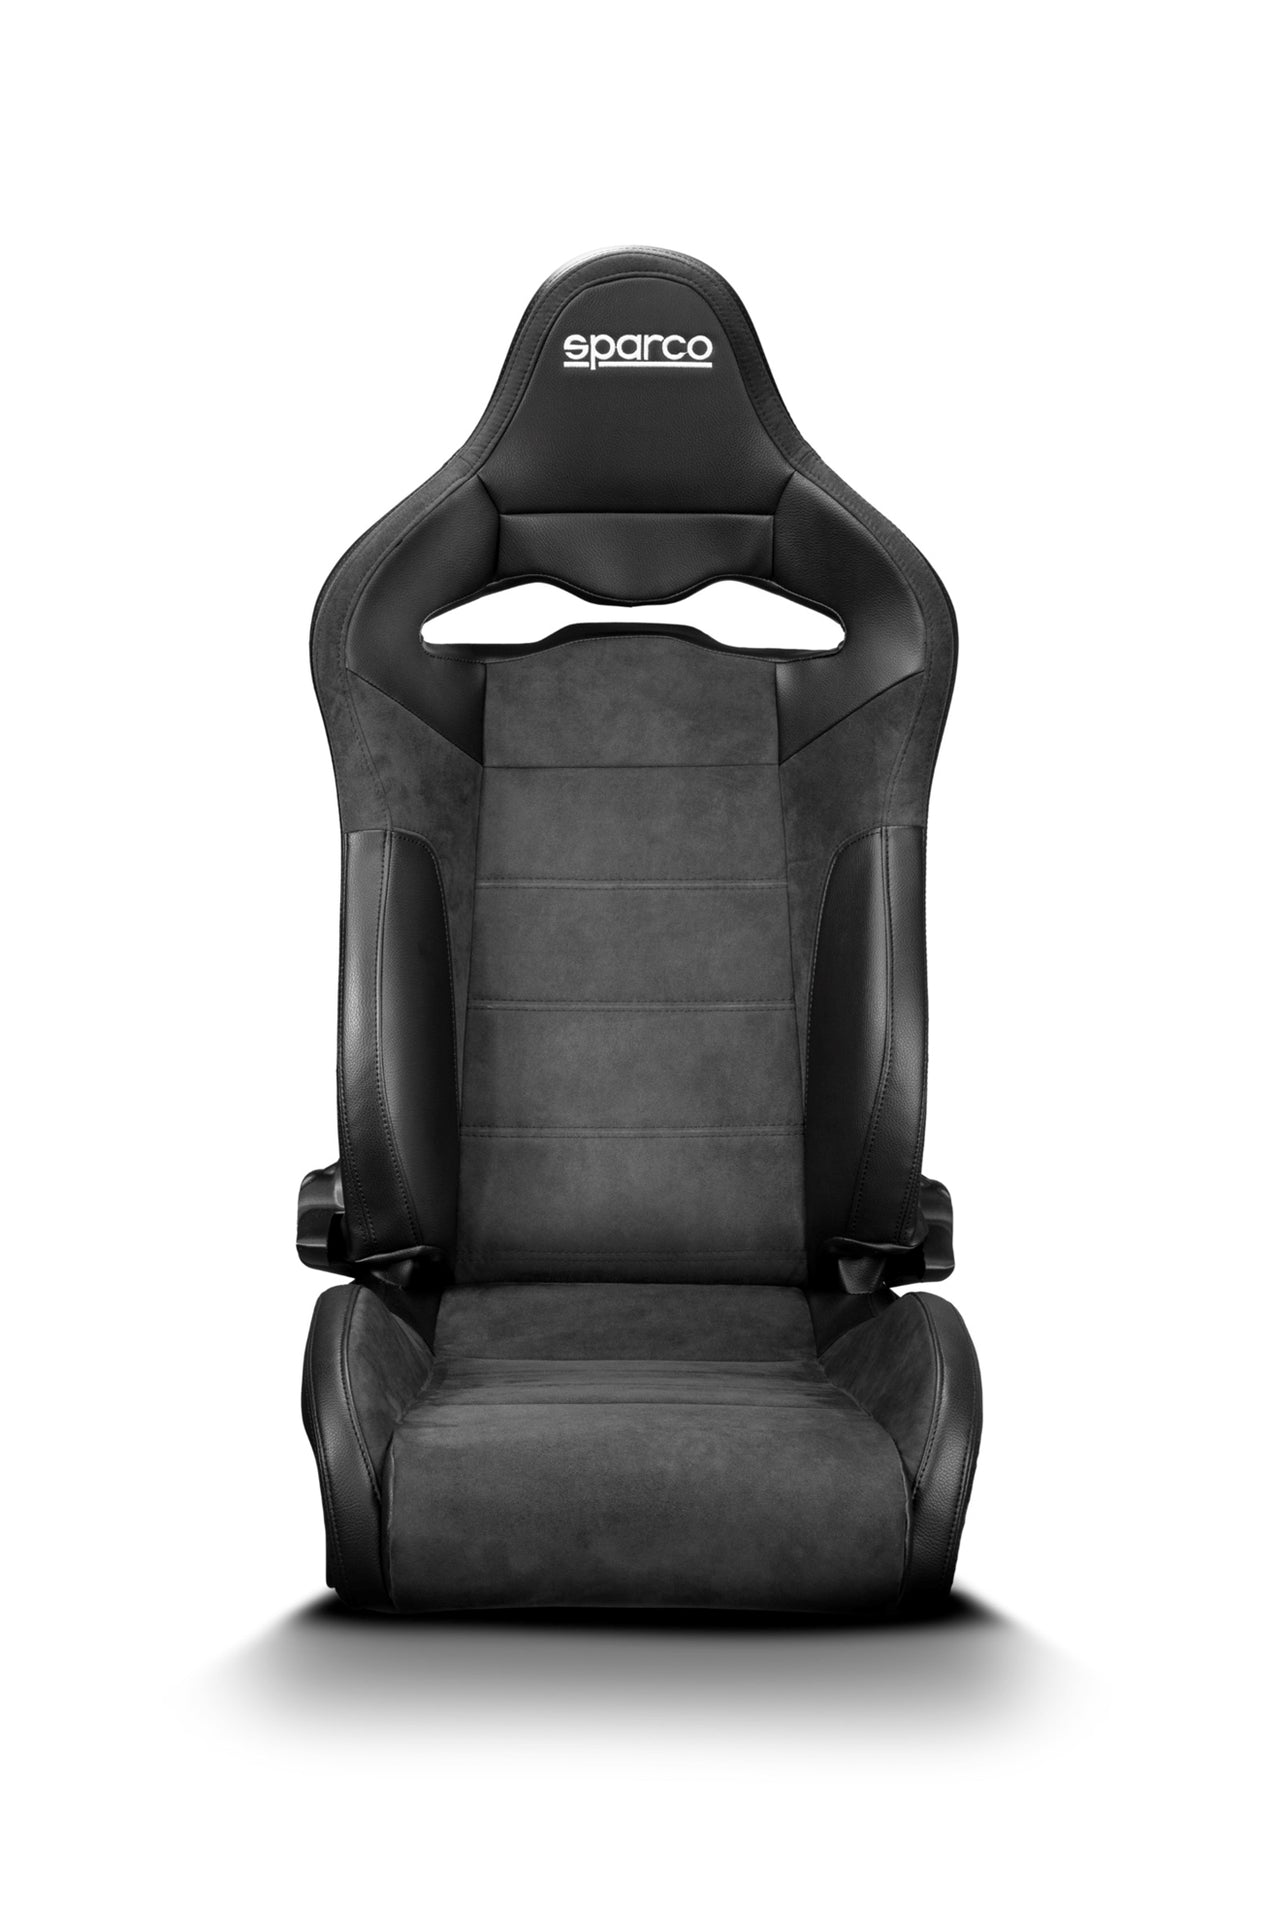 Sparco SPR Seat Front view Image